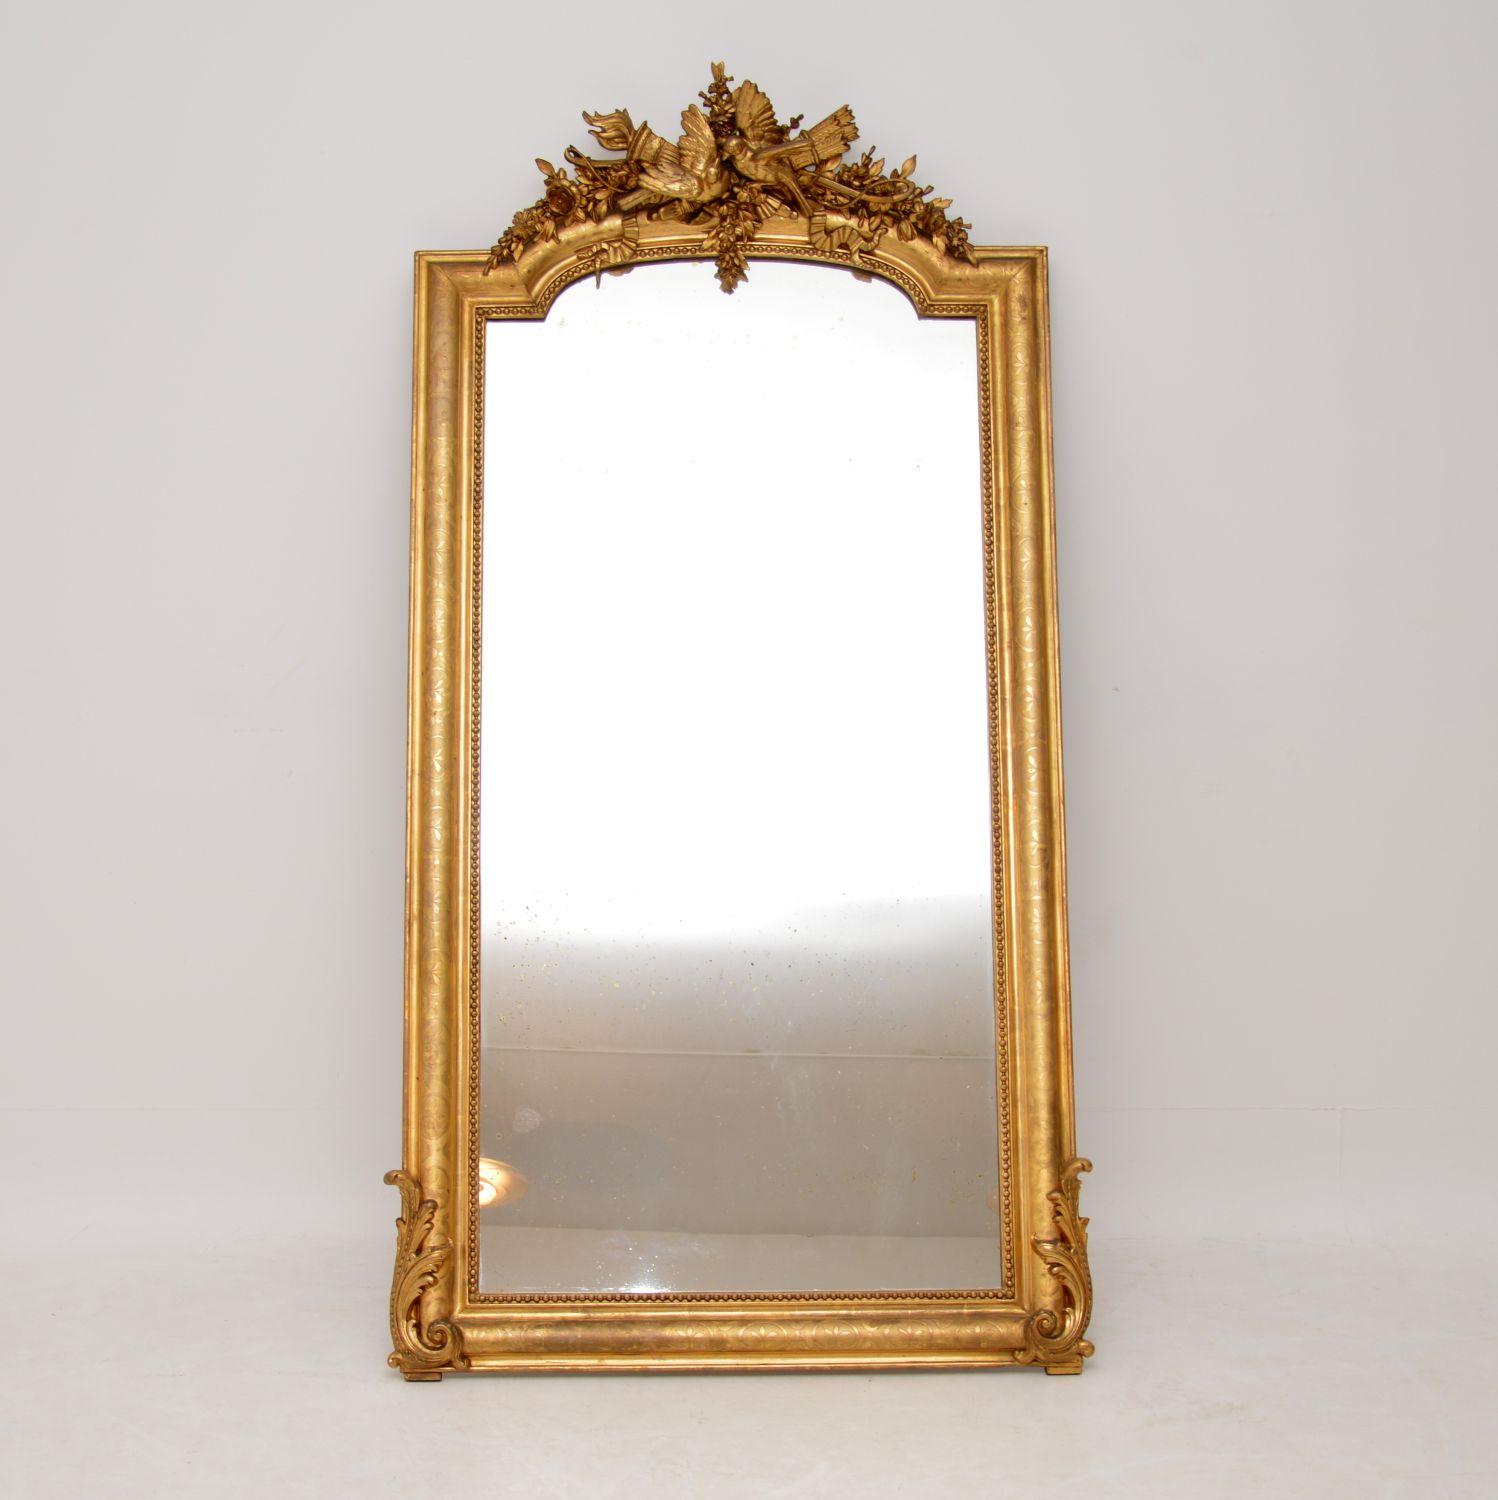 Large antique French carved giltwood mirror in excellent original condition & with some fine features. Please enlarge all the images to see all the fine details. The mirror itself is original & has a little spotting in places, but that’s acceptable